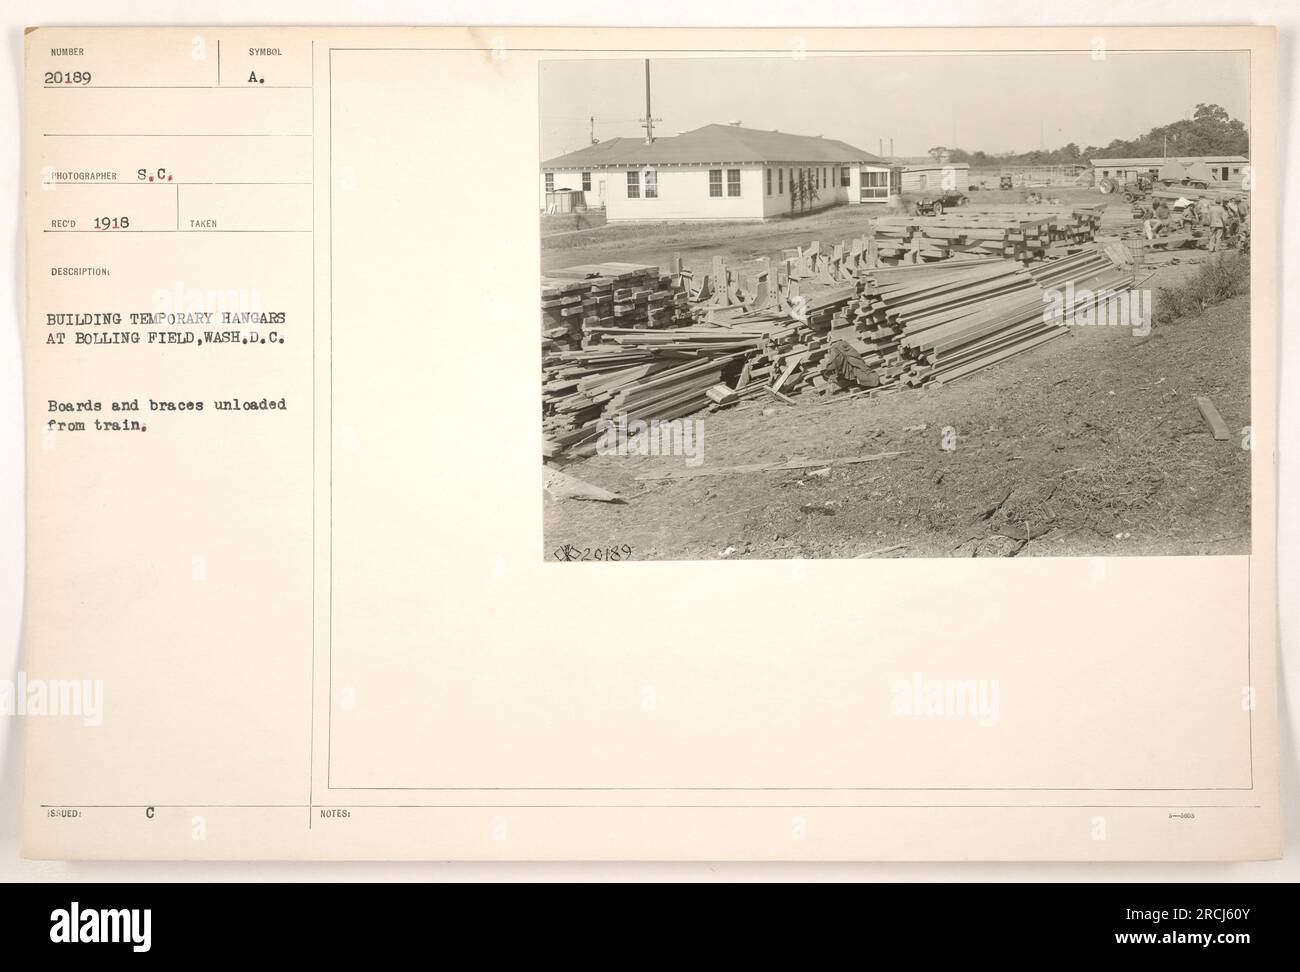 Construction work underway at Bolling Field in Washington D.C. Temporary hangars being built by American military during World War One. Boards and braces being unloaded from a train to assist in the construction process. (Note: Image 20189 from the series of photographs documenting American military activities during this time) Stock Photo